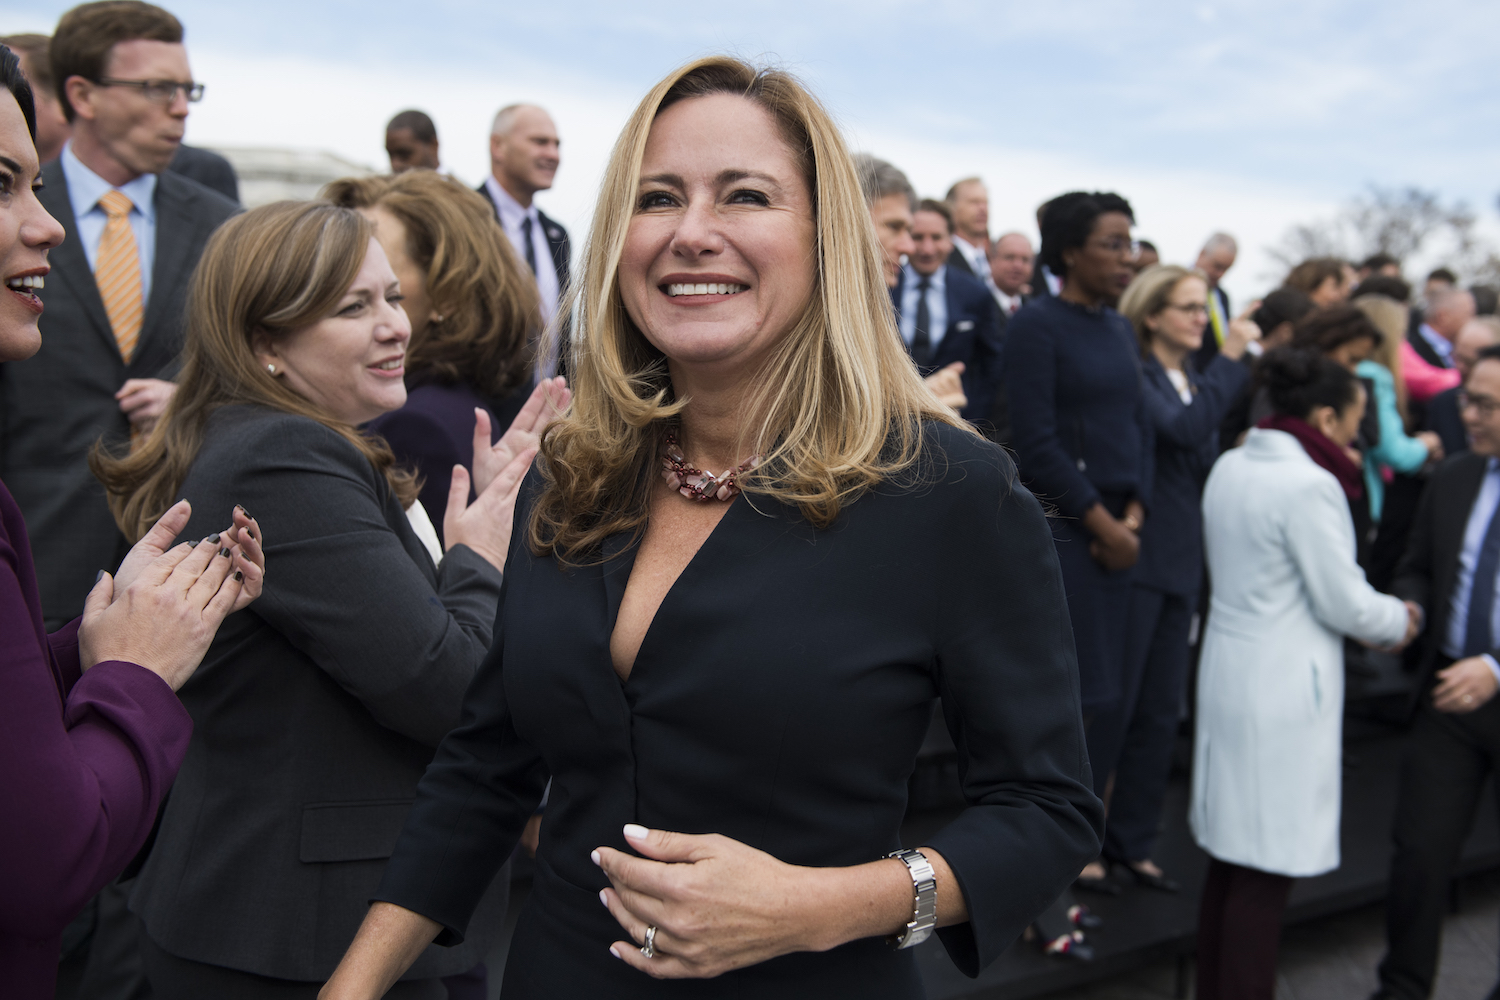 During her term in Congress, gun reform was one of the main issues Mucarsel-Powell took-on with her own legislation. Photo: Tom Williams/CQ Roll Call via Getty Images